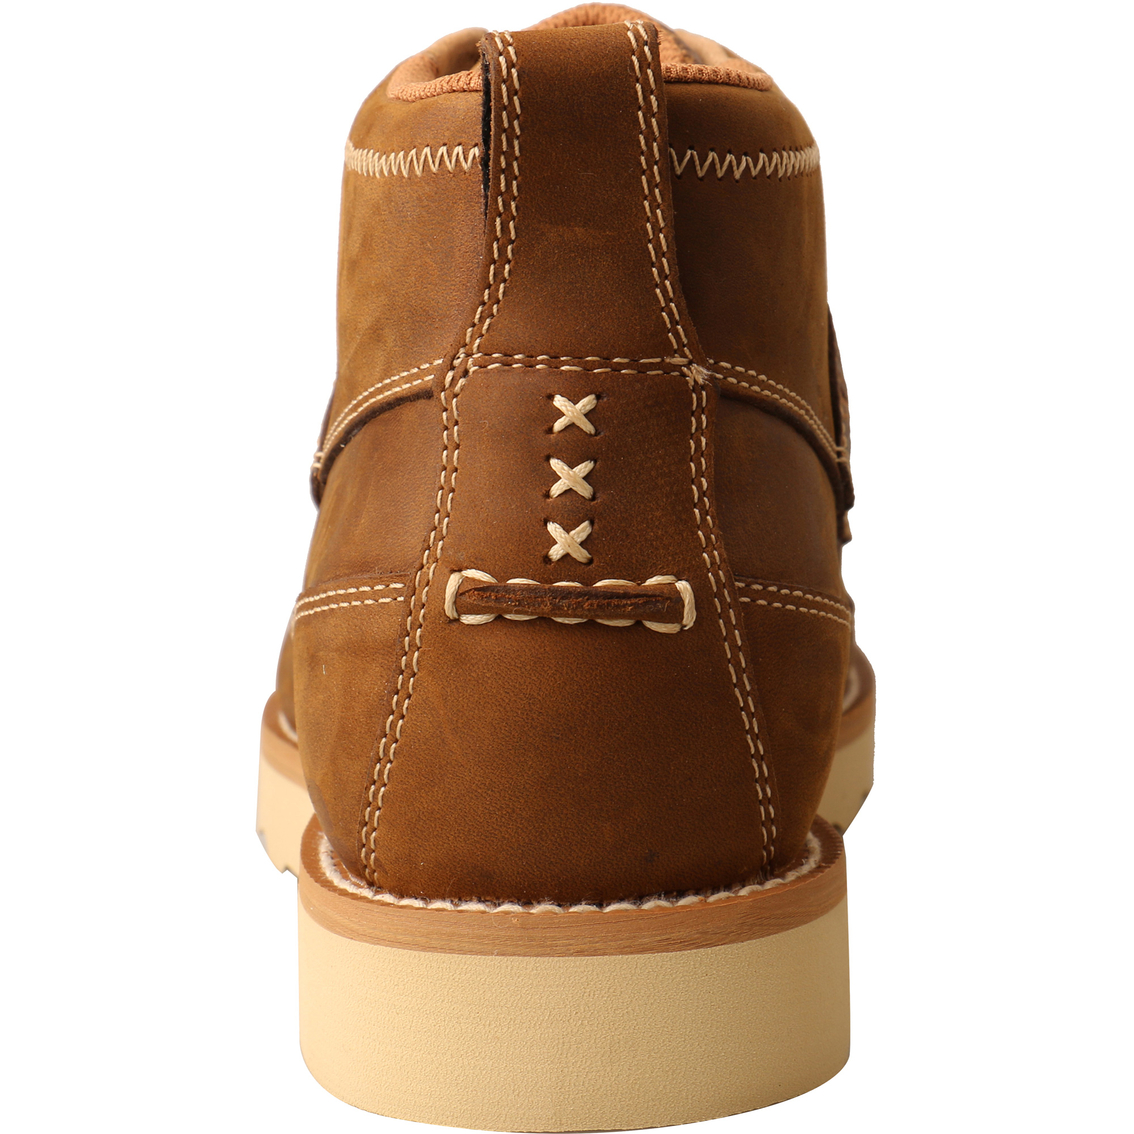 Twisted X Men's 4 in. Wedge Sole Boots - Image 6 of 7